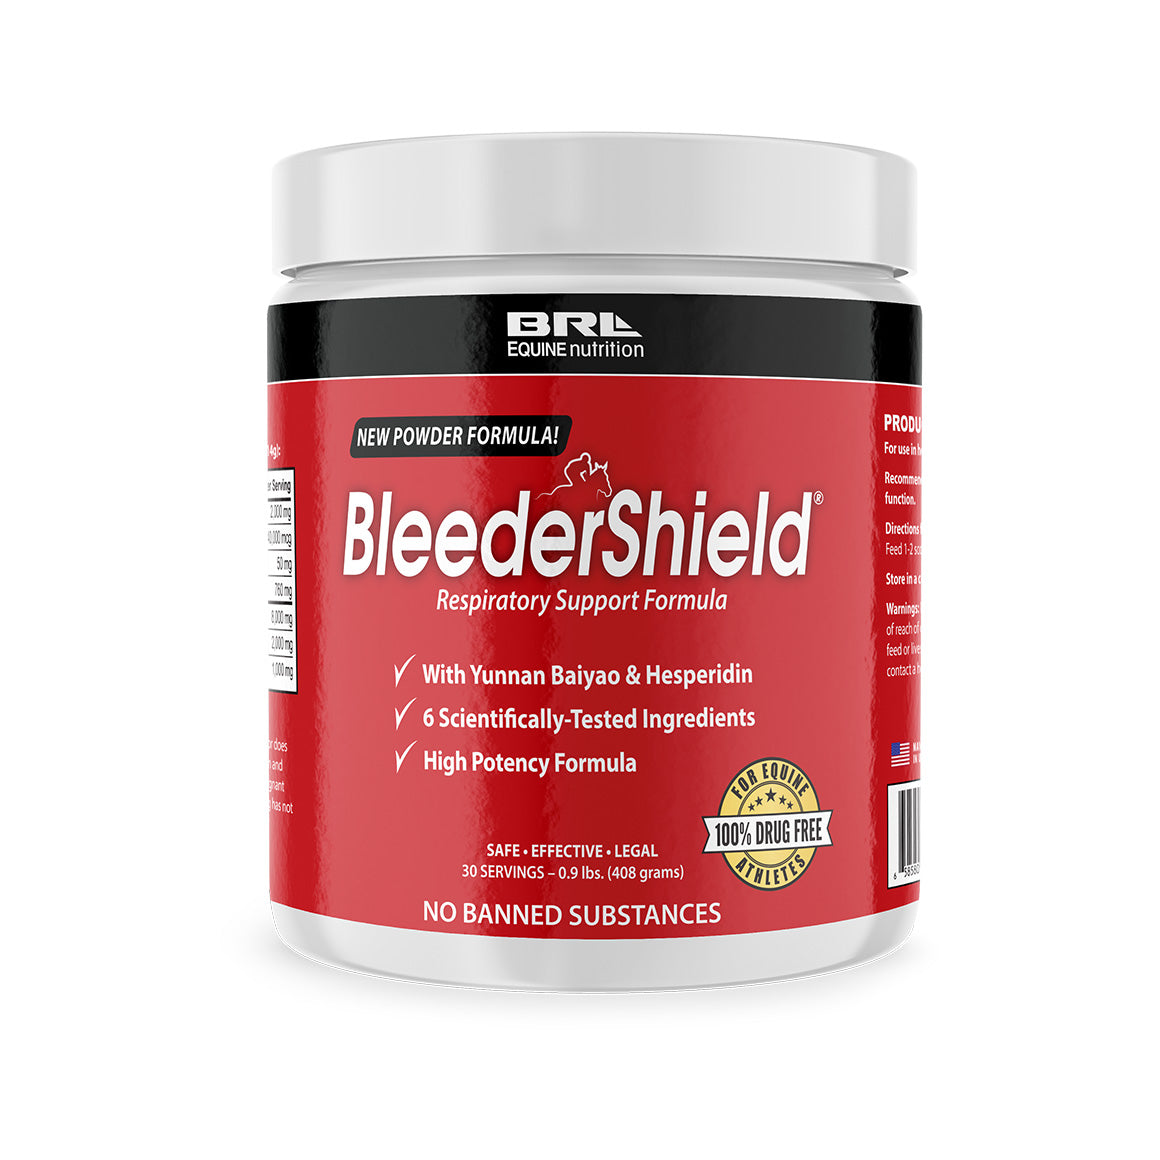  BleederShield powder lung support for horses